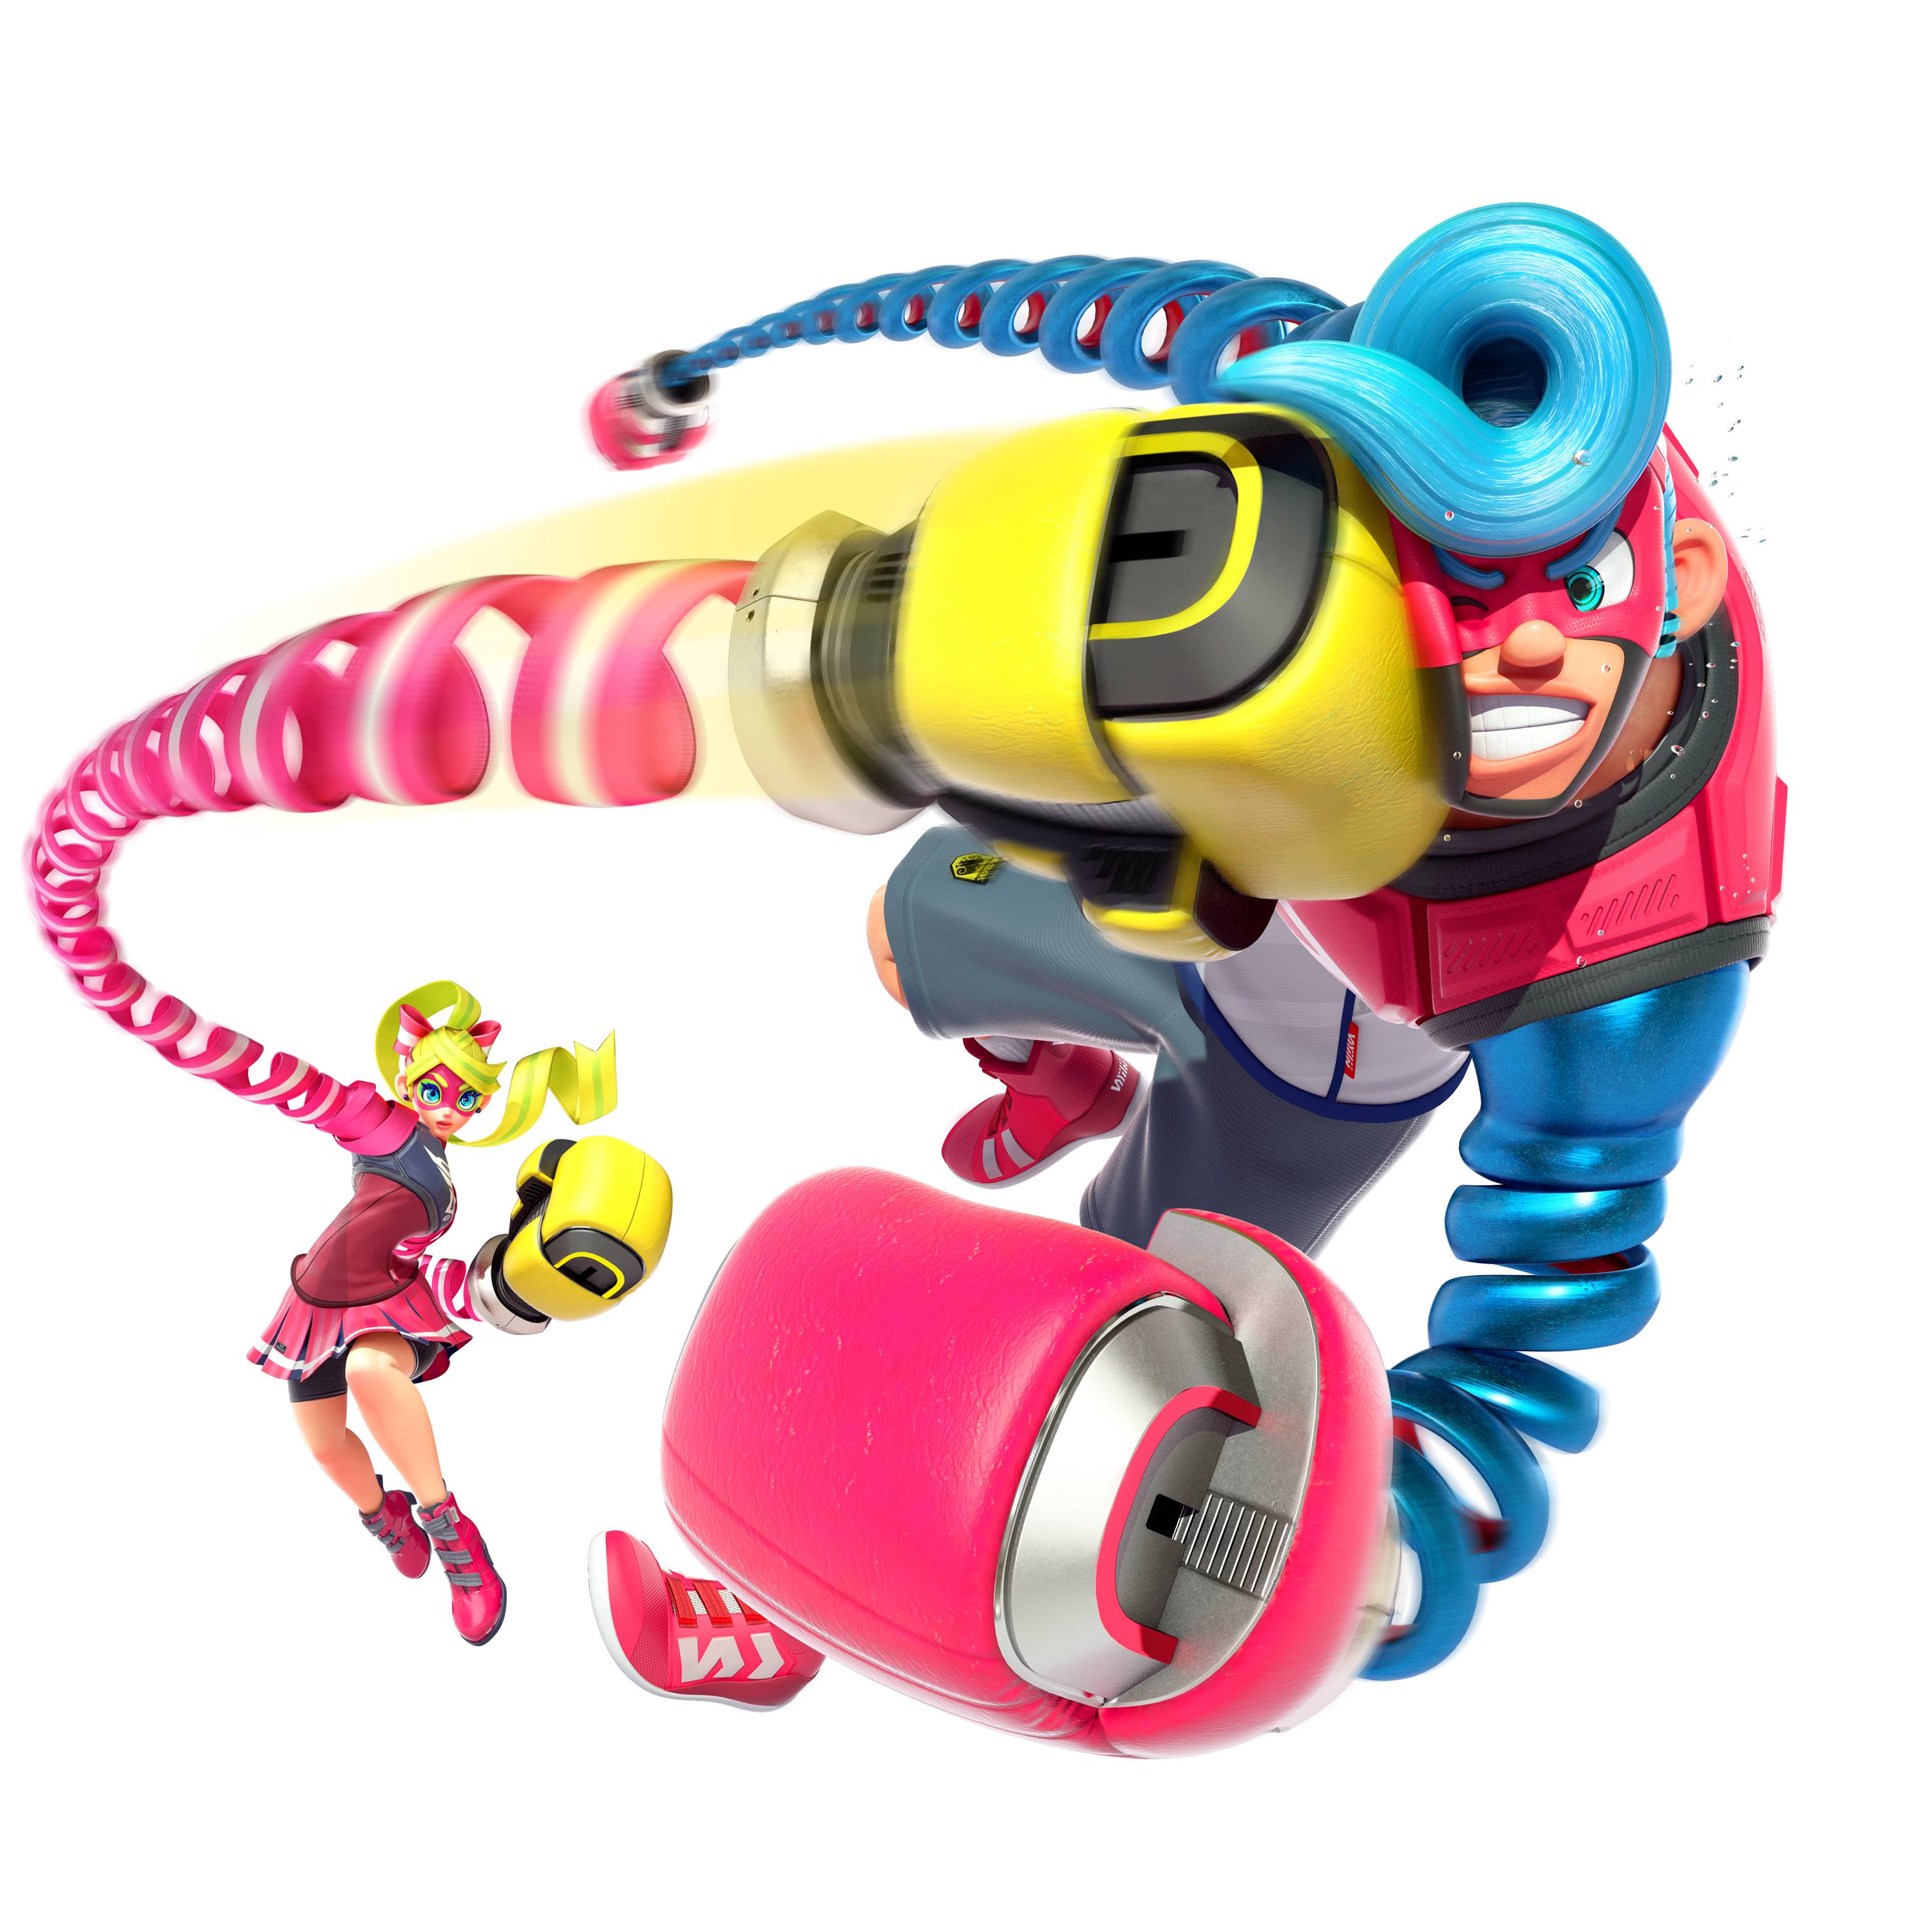 Arms Personnage